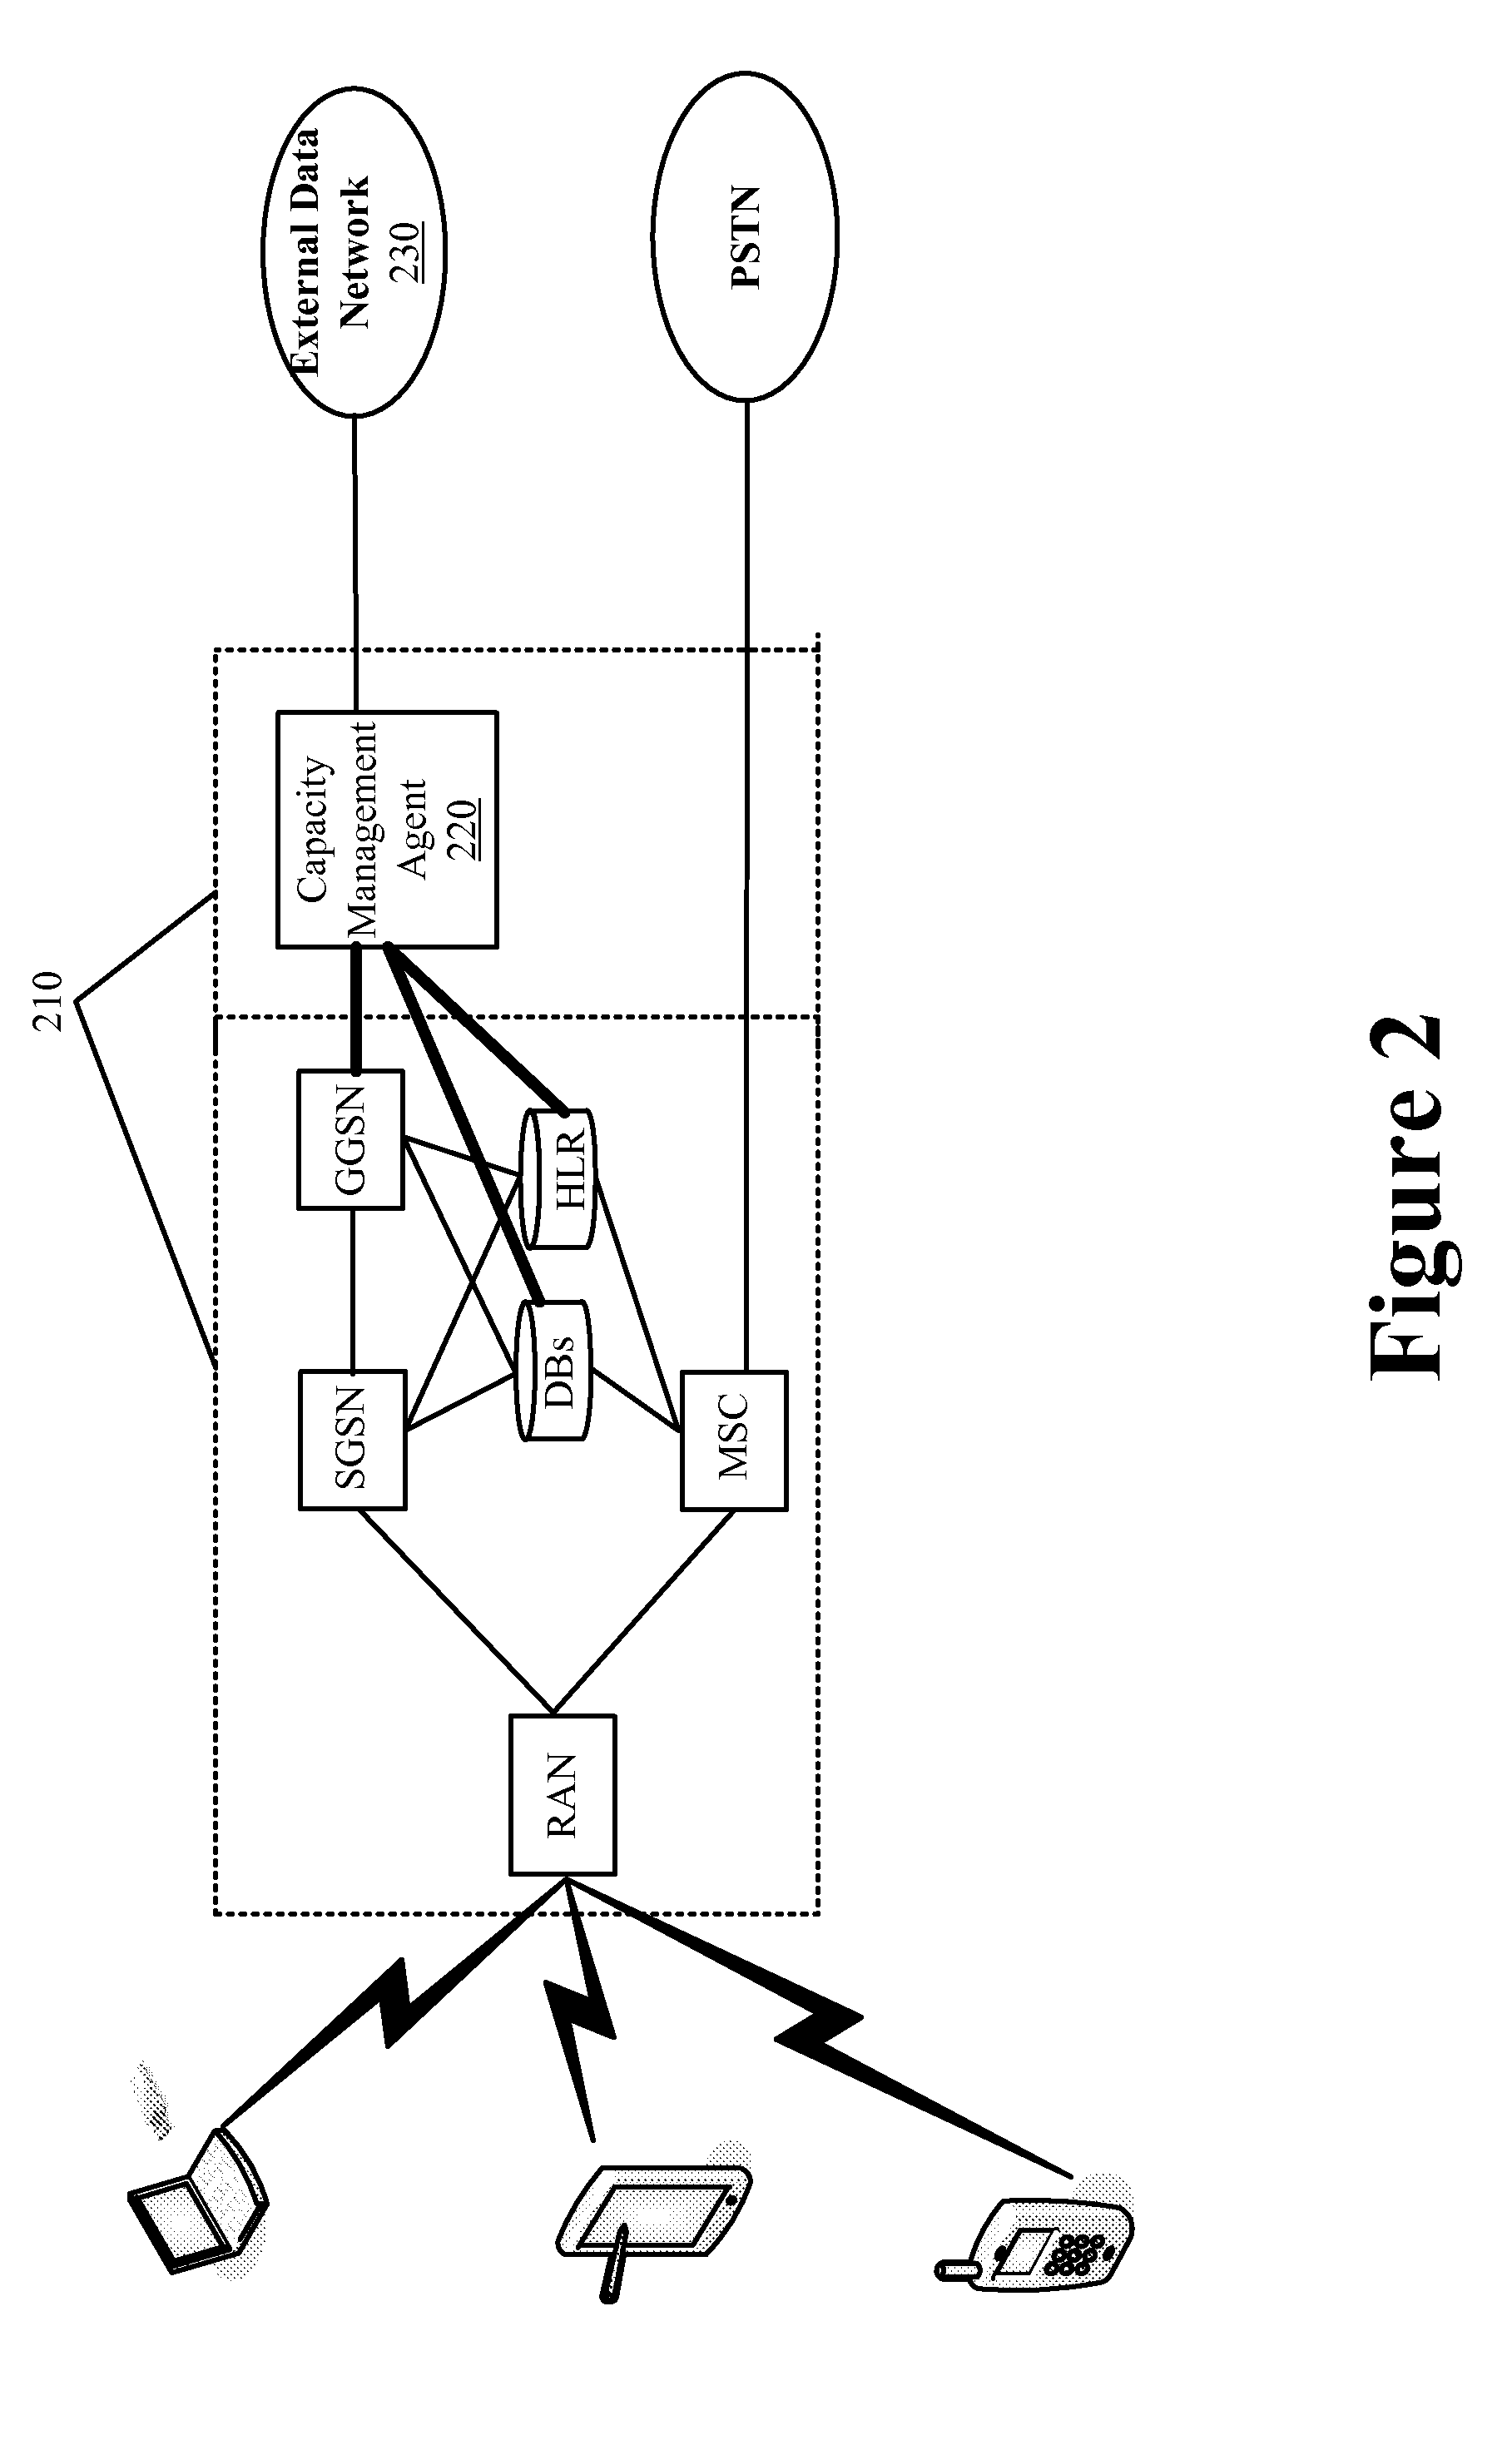 Request Modification for Transparent Capacity Management in a Carrier Network